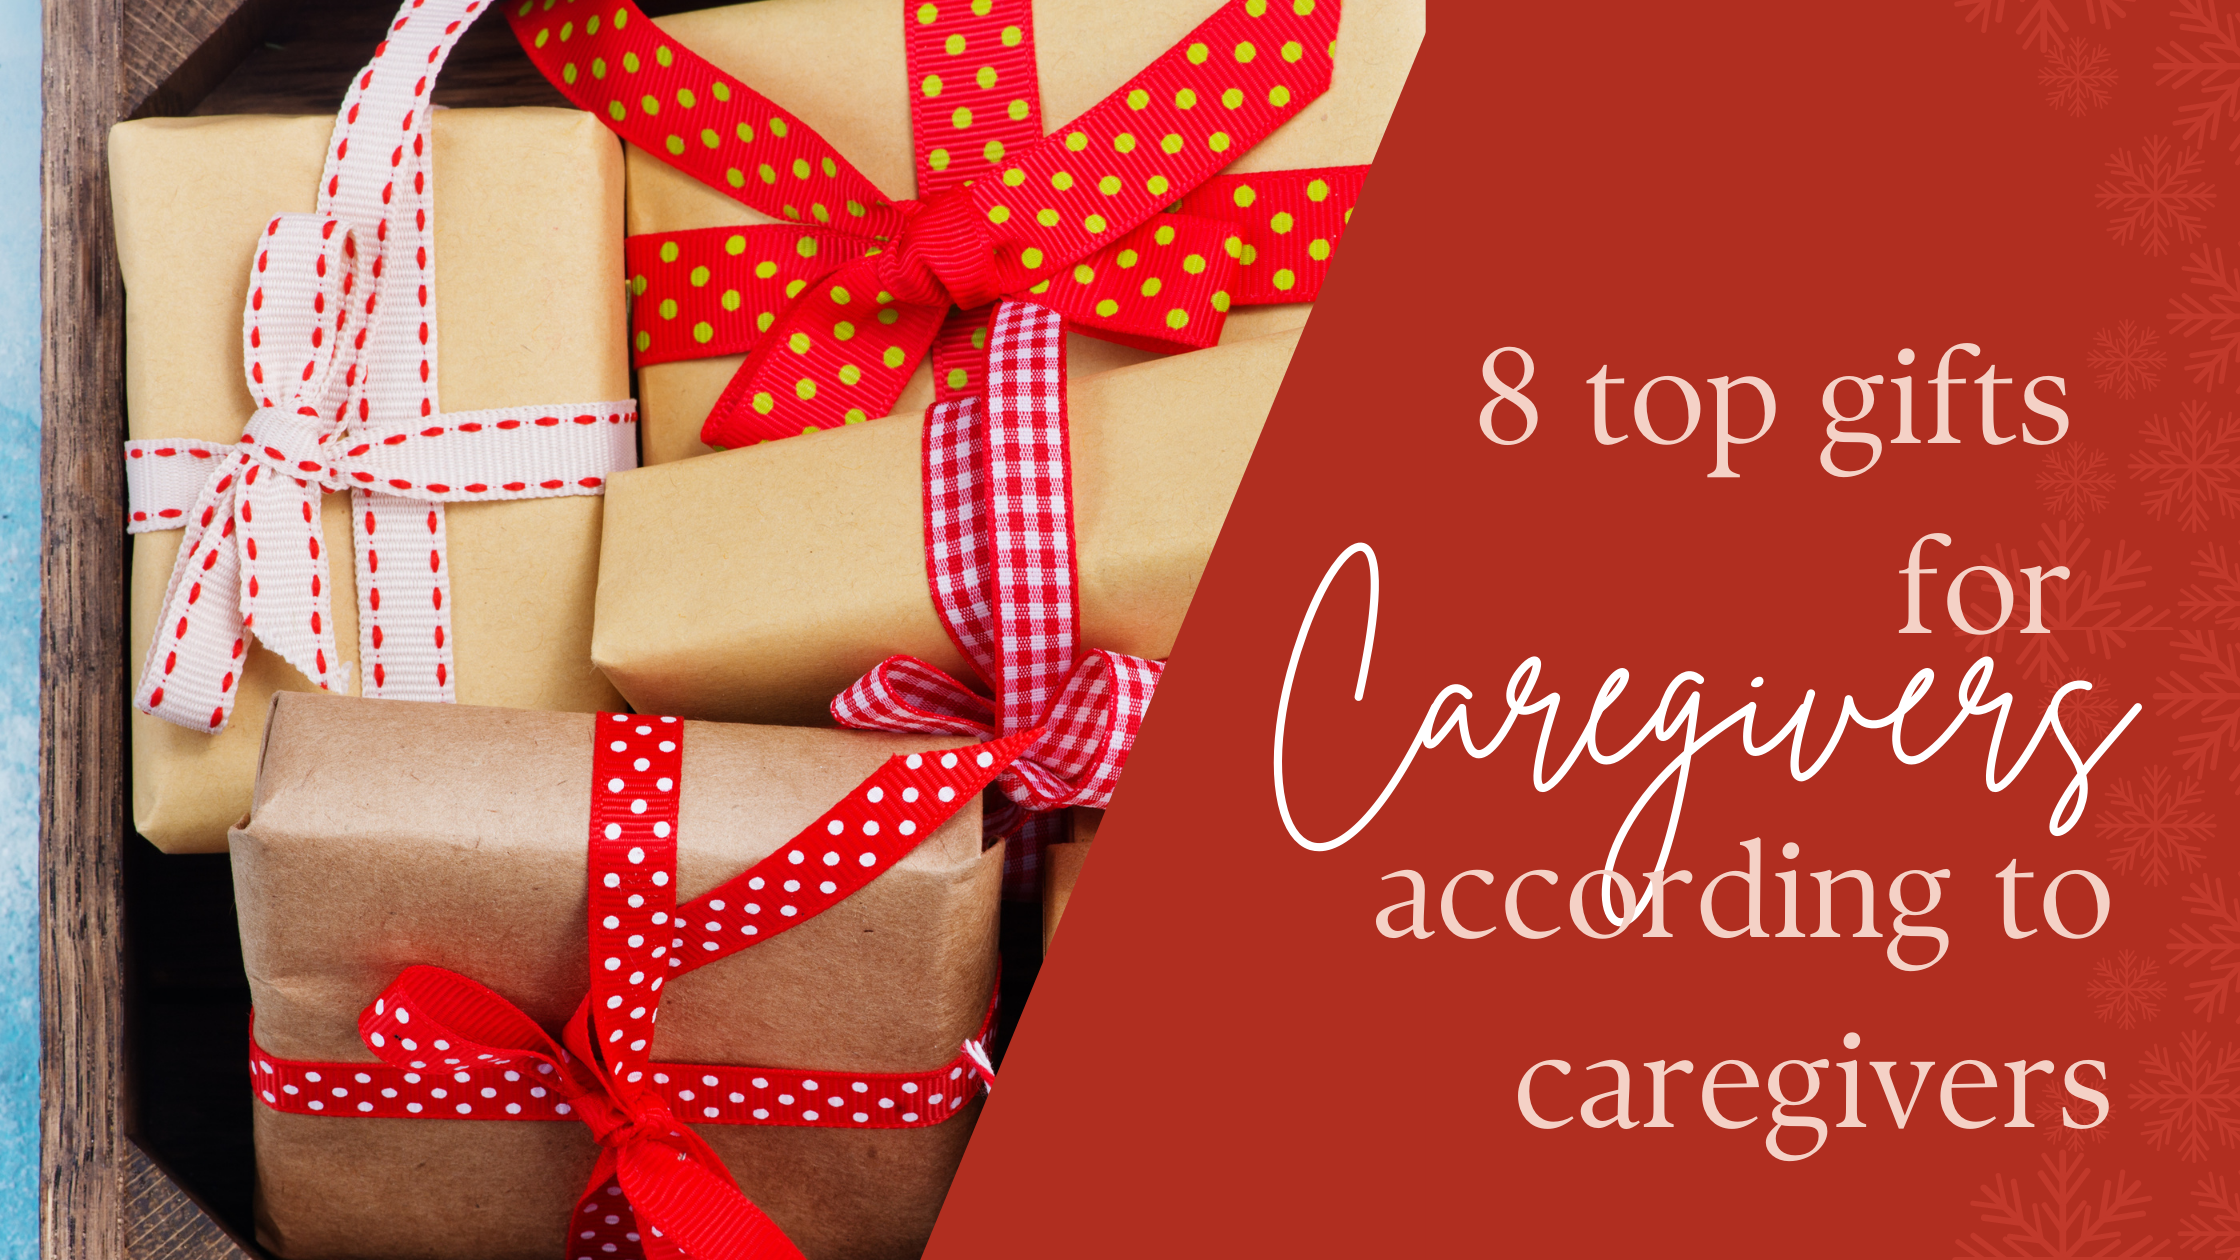 8 Top Gifts for Caregivers According to Caregivers